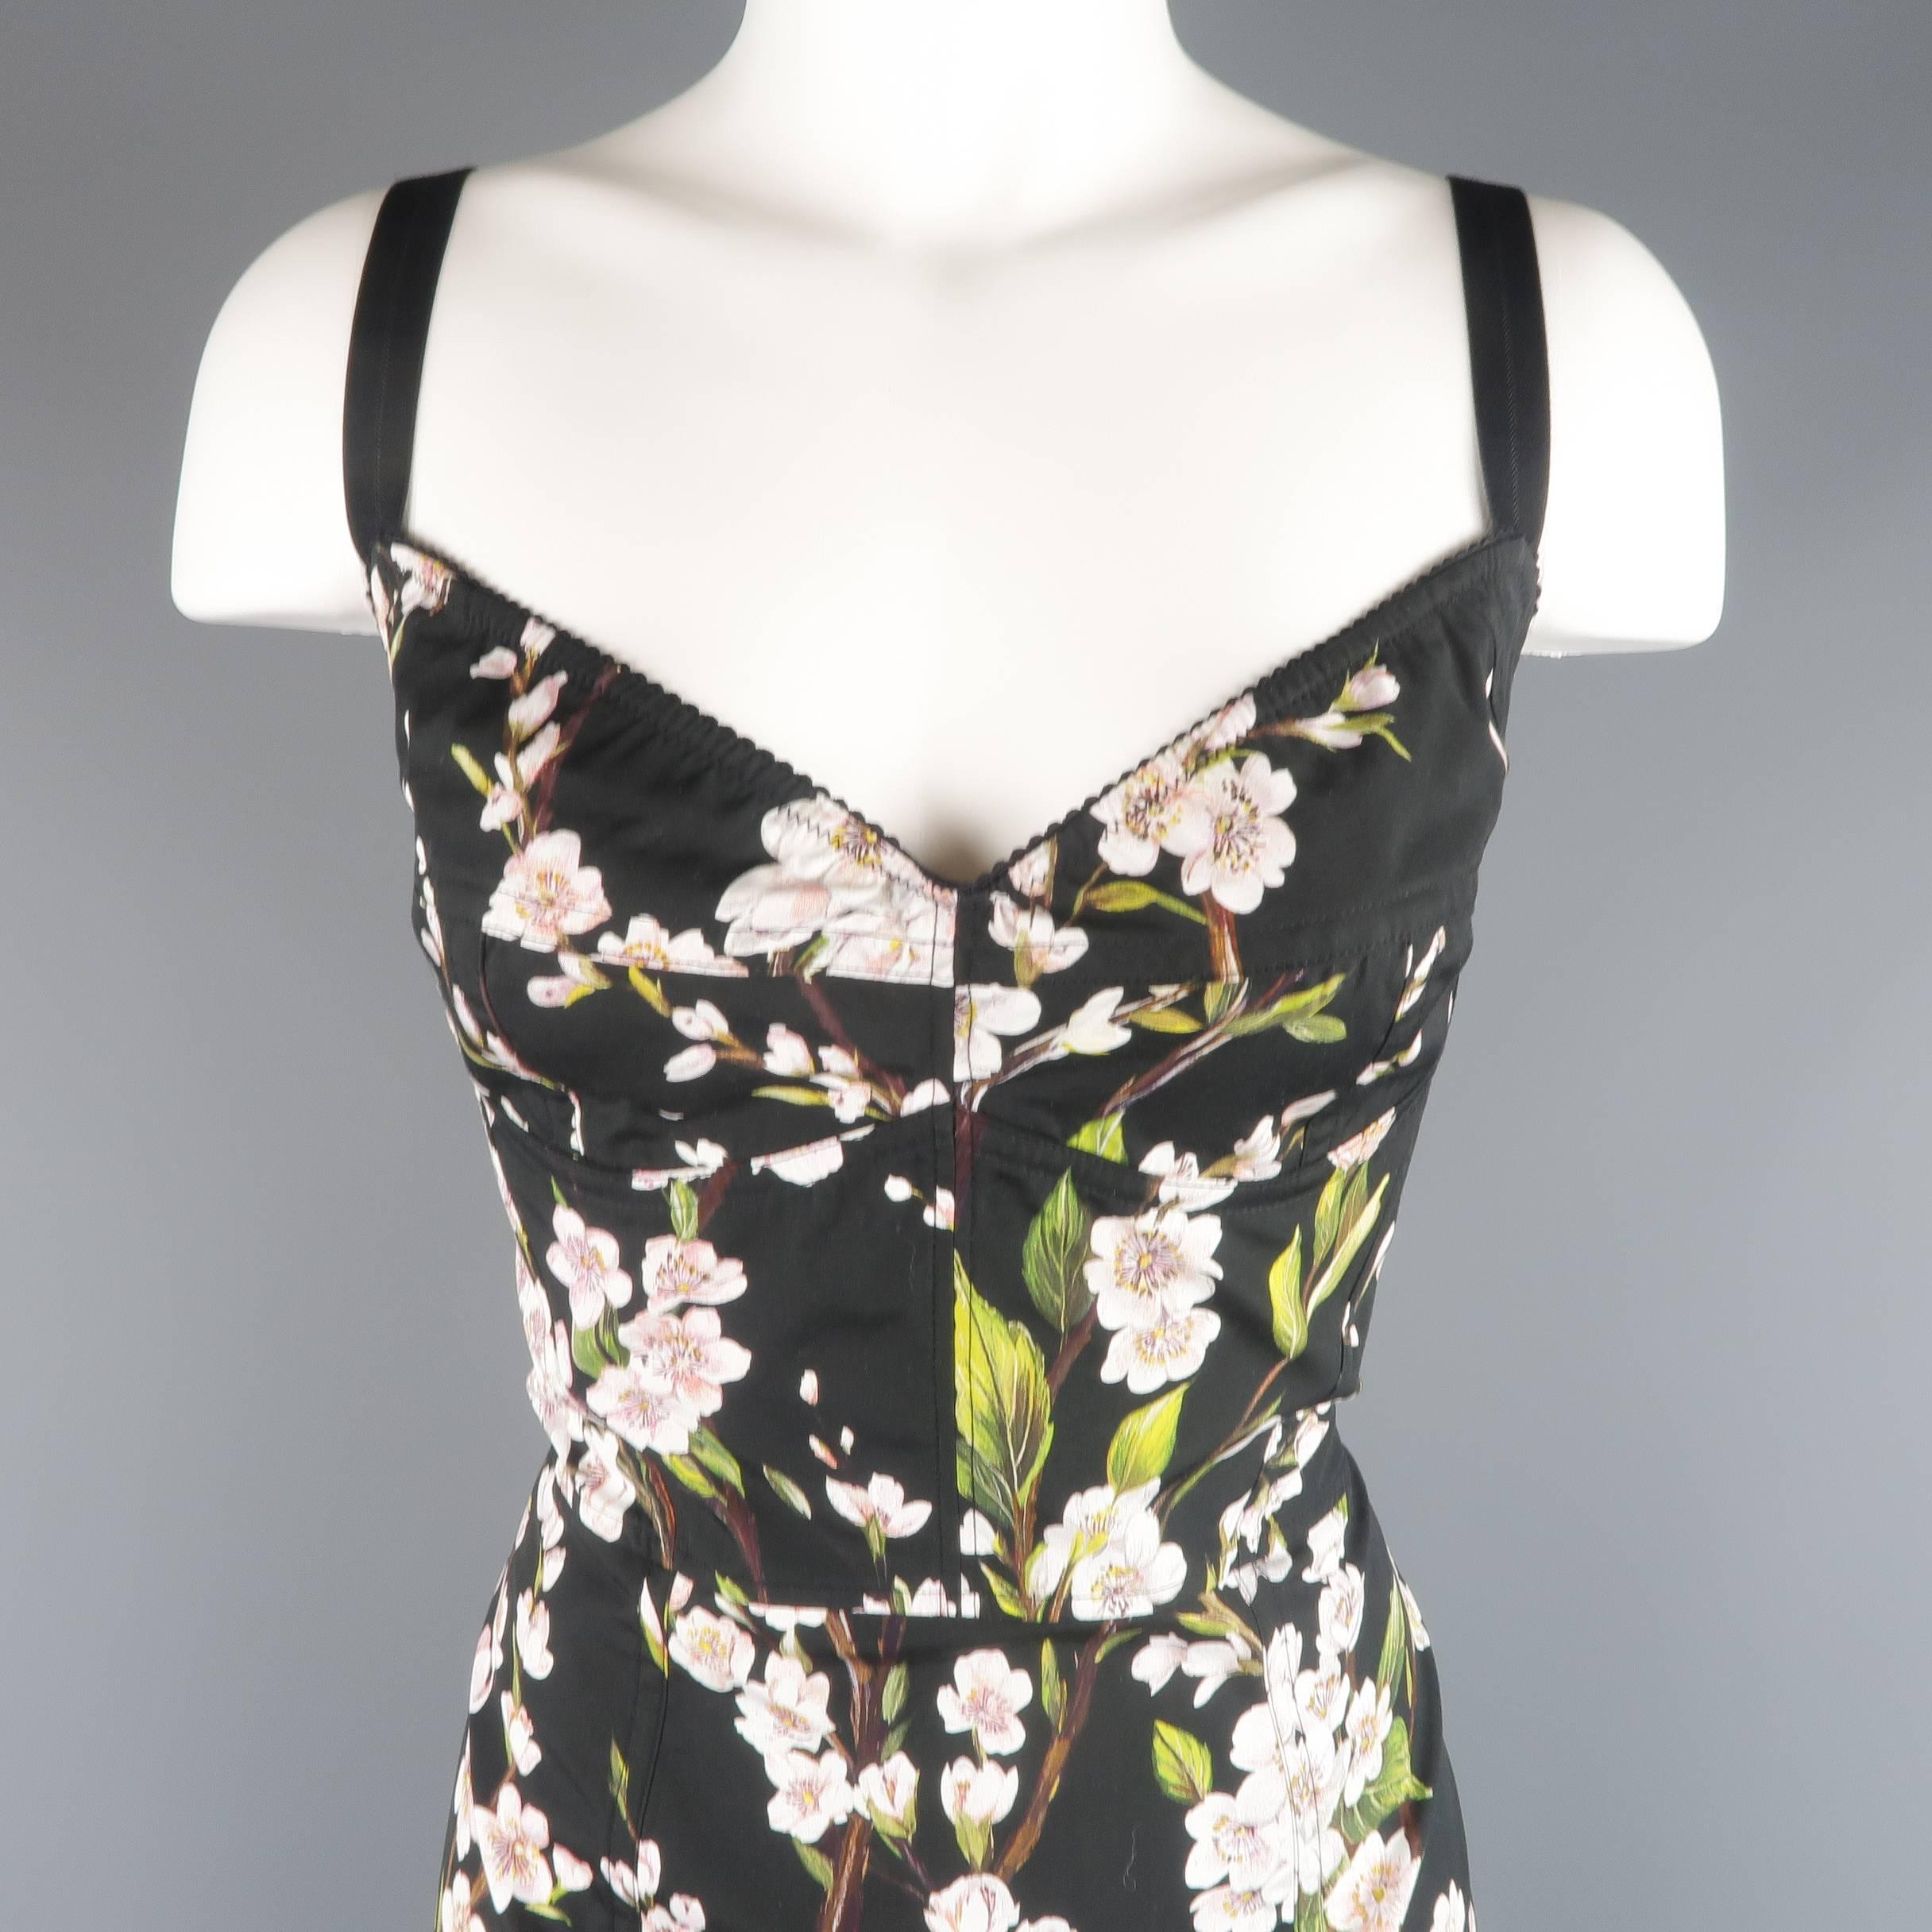 DOLCE & GABBANA sheath dress comes in a light weight black cotton with all over cherry blossom print and features a retro lingerie constructed bustier bra bodice top, fitted pencil skirt, and stretch panel back. Made in Italy.
 
Excellent Pre-Owned